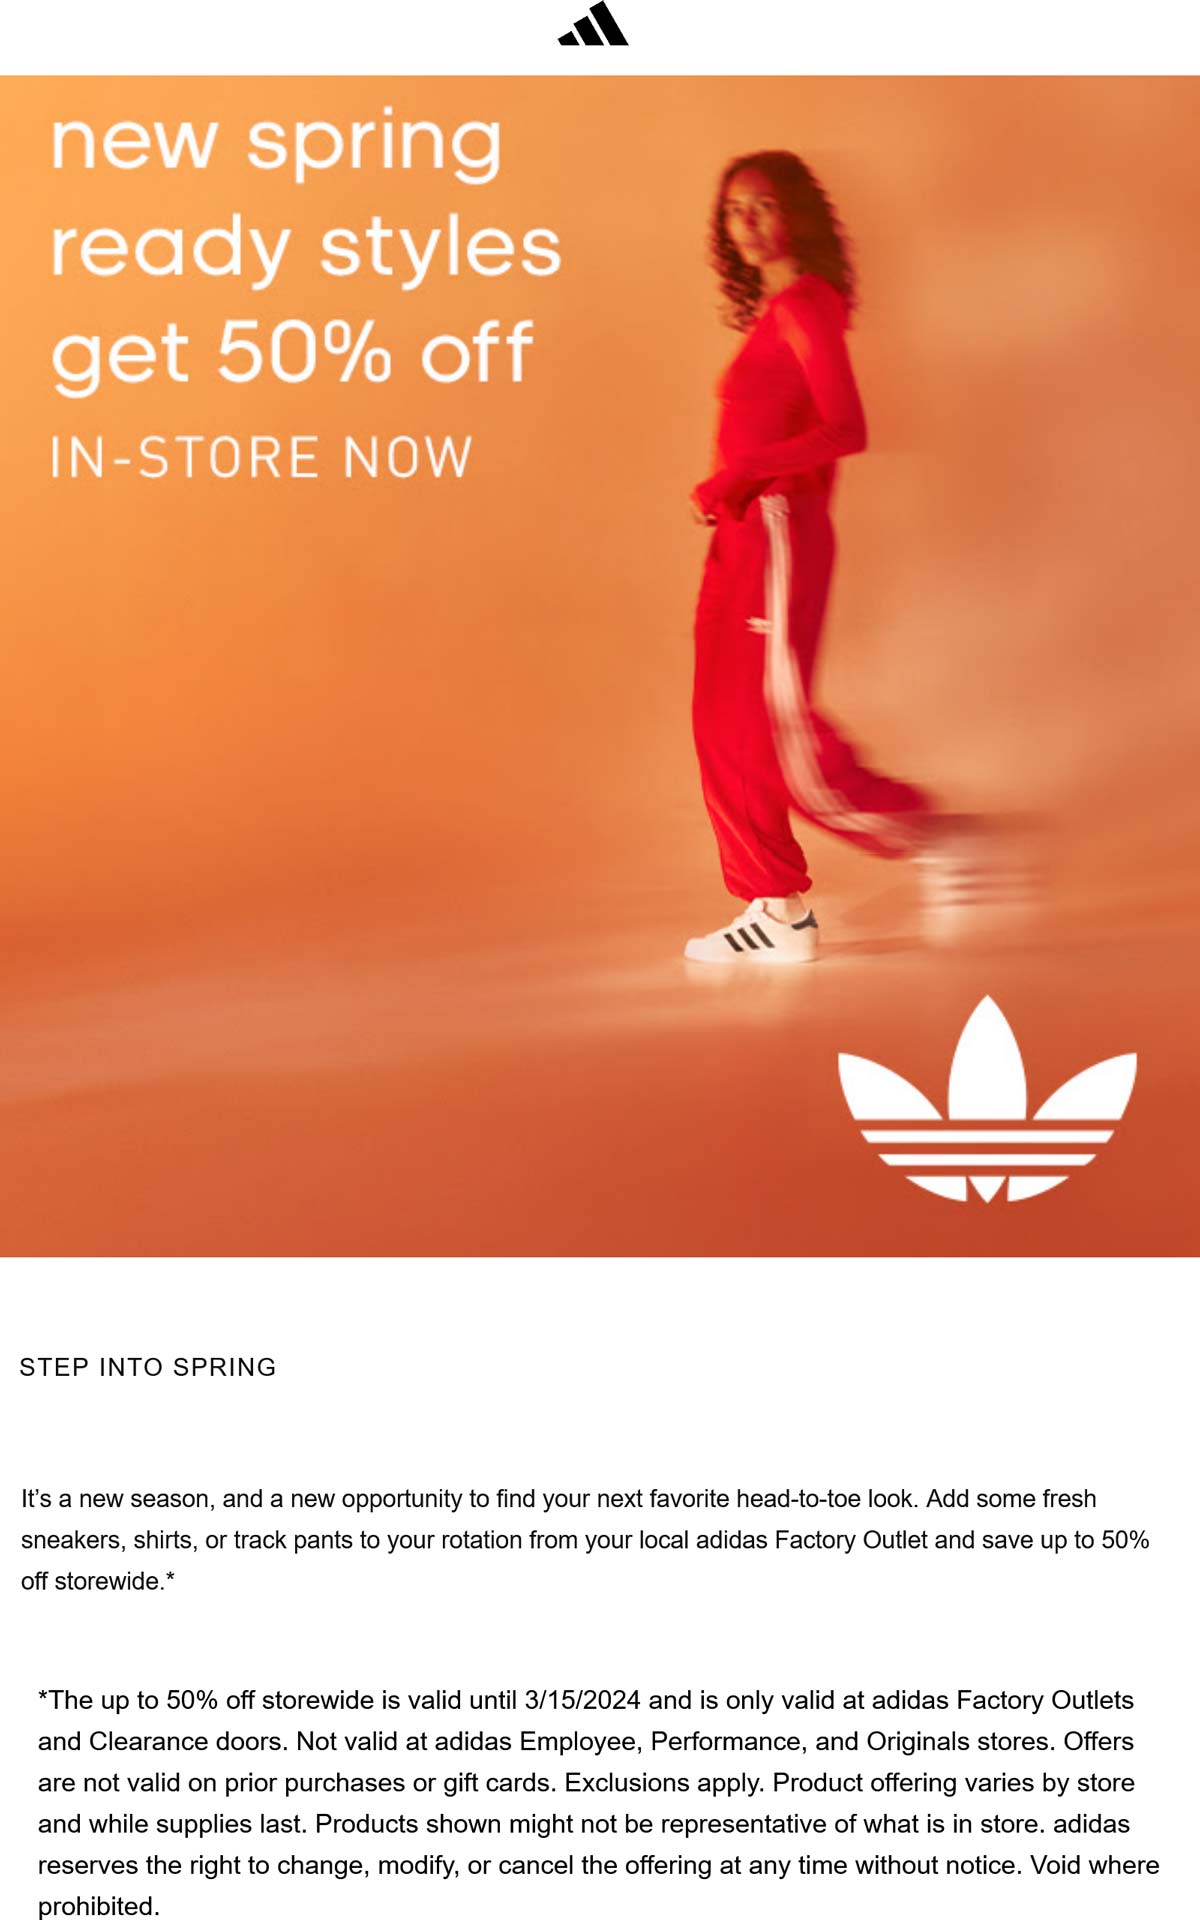 adidas Factory Outlets stores Coupon  Spring styles are 50% off at adidas Factory Outlets #adidasfactoryoutlets 